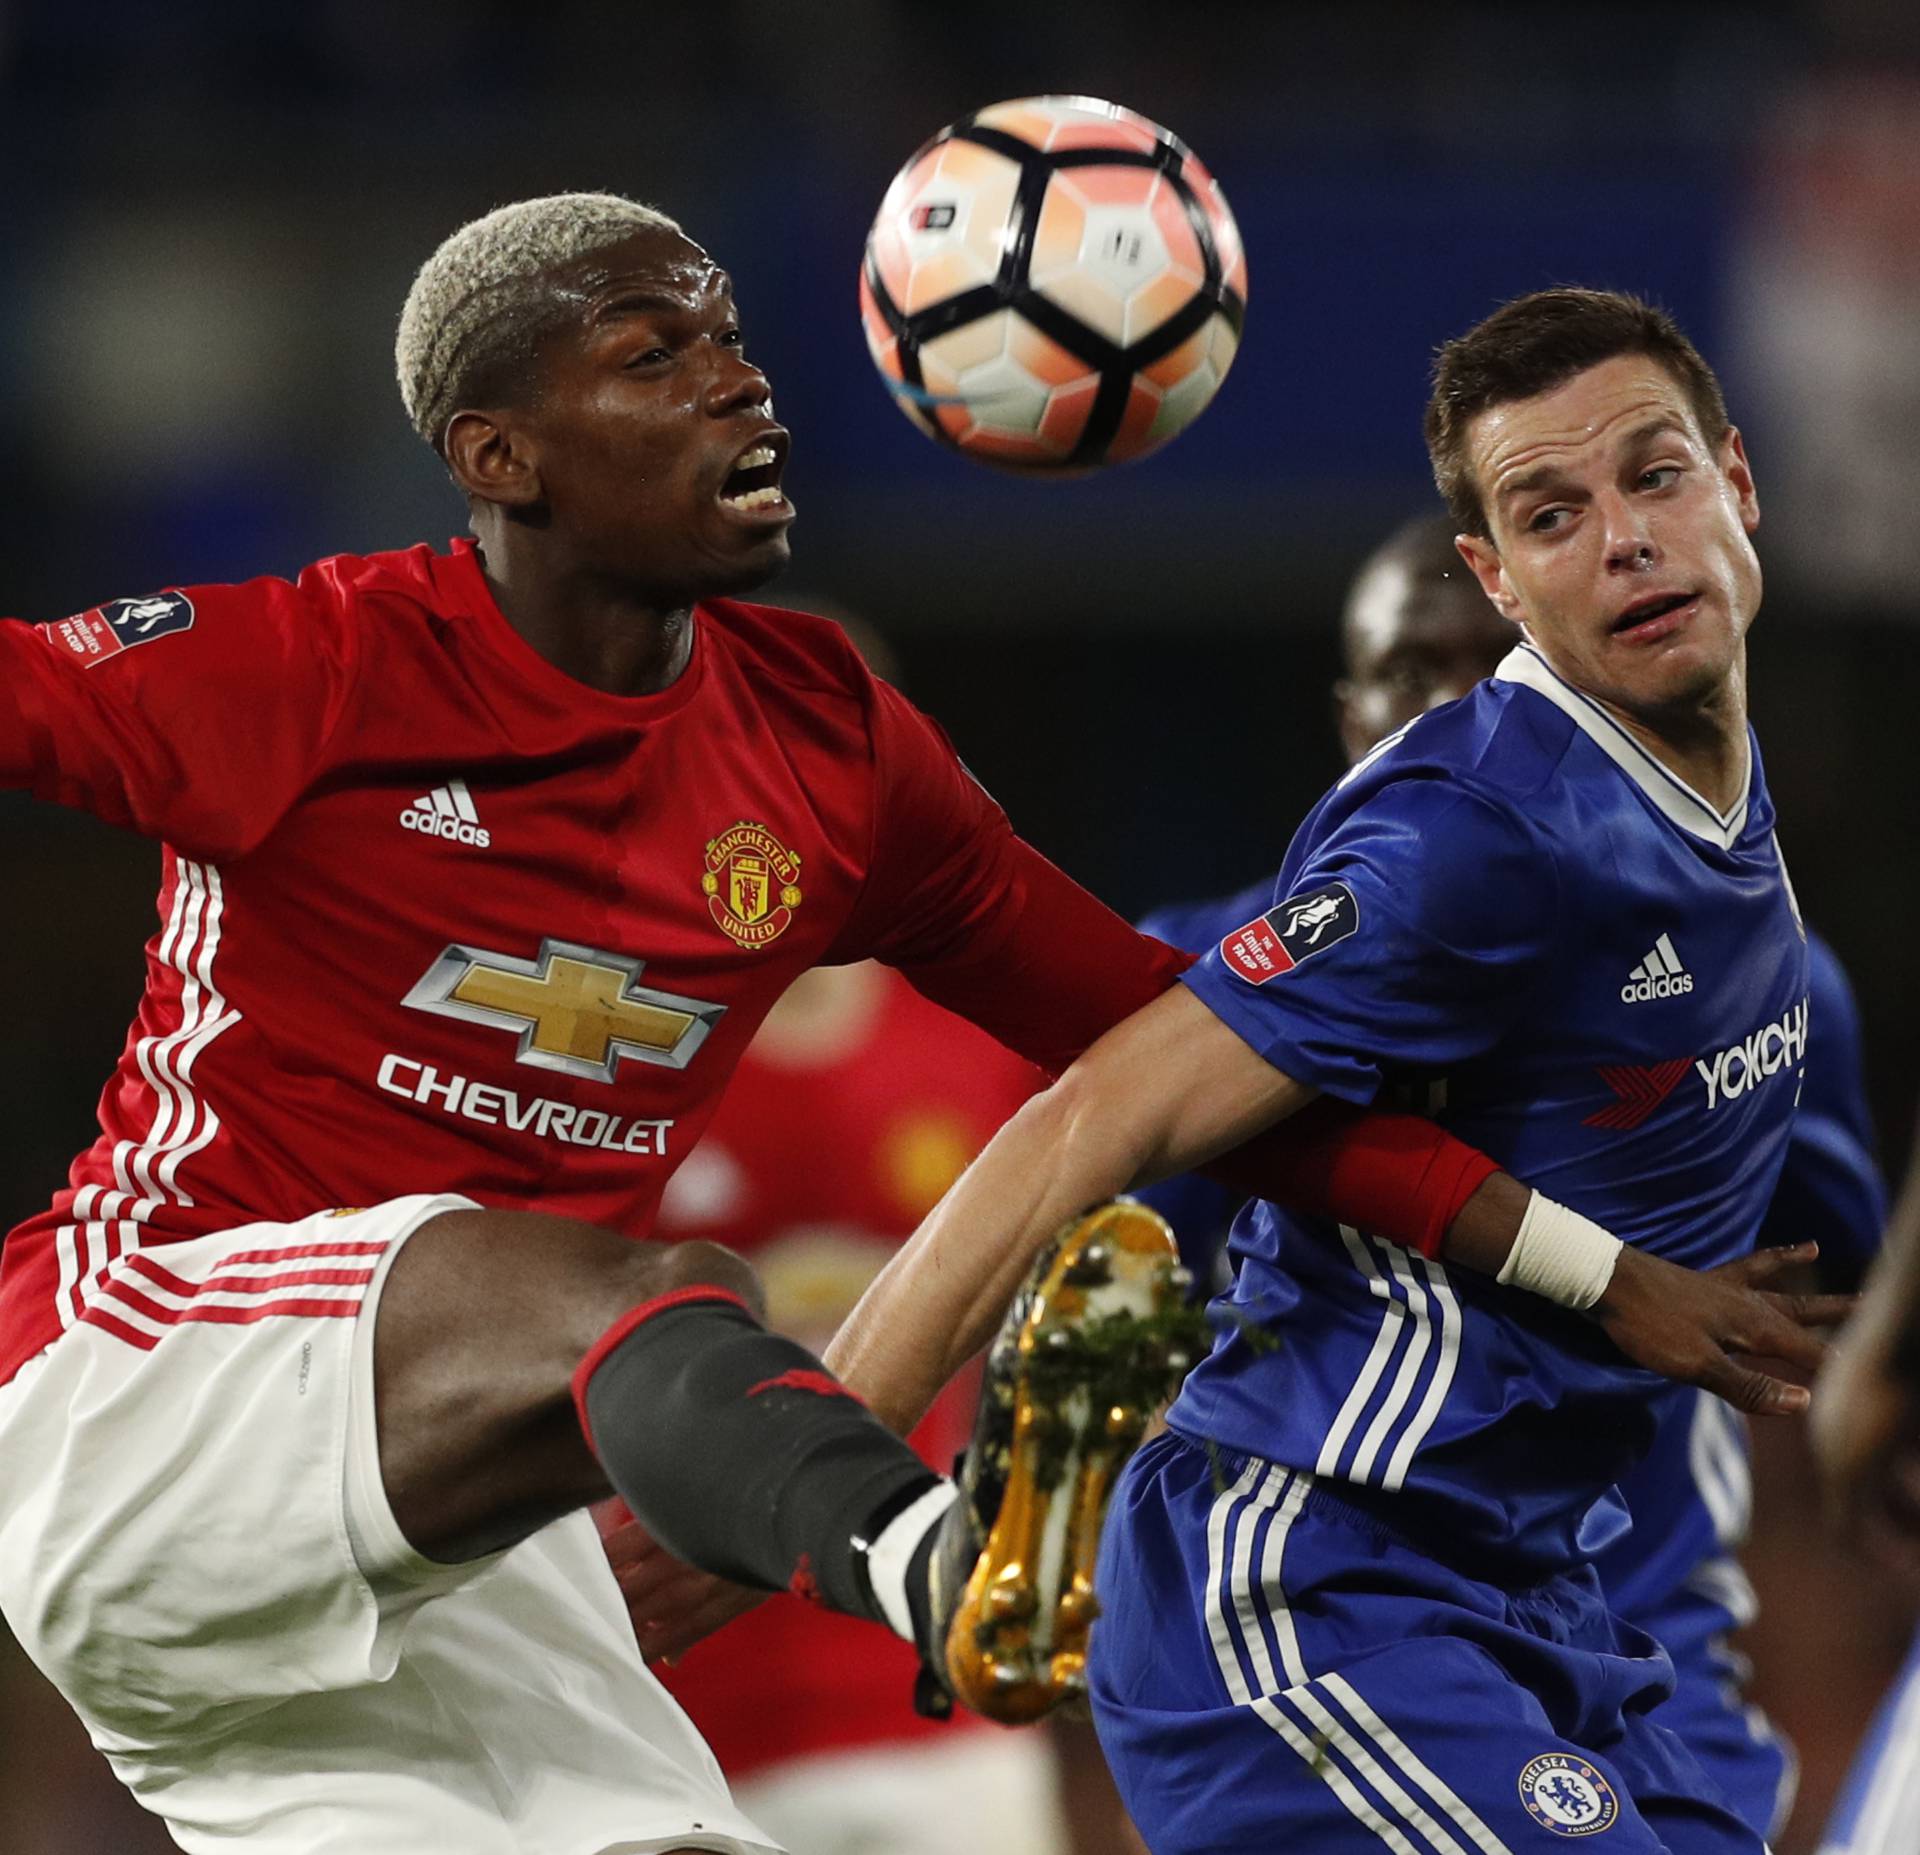 Manchester United's Paul Pogba in action with Chelsea's Cesar Azpilicueta